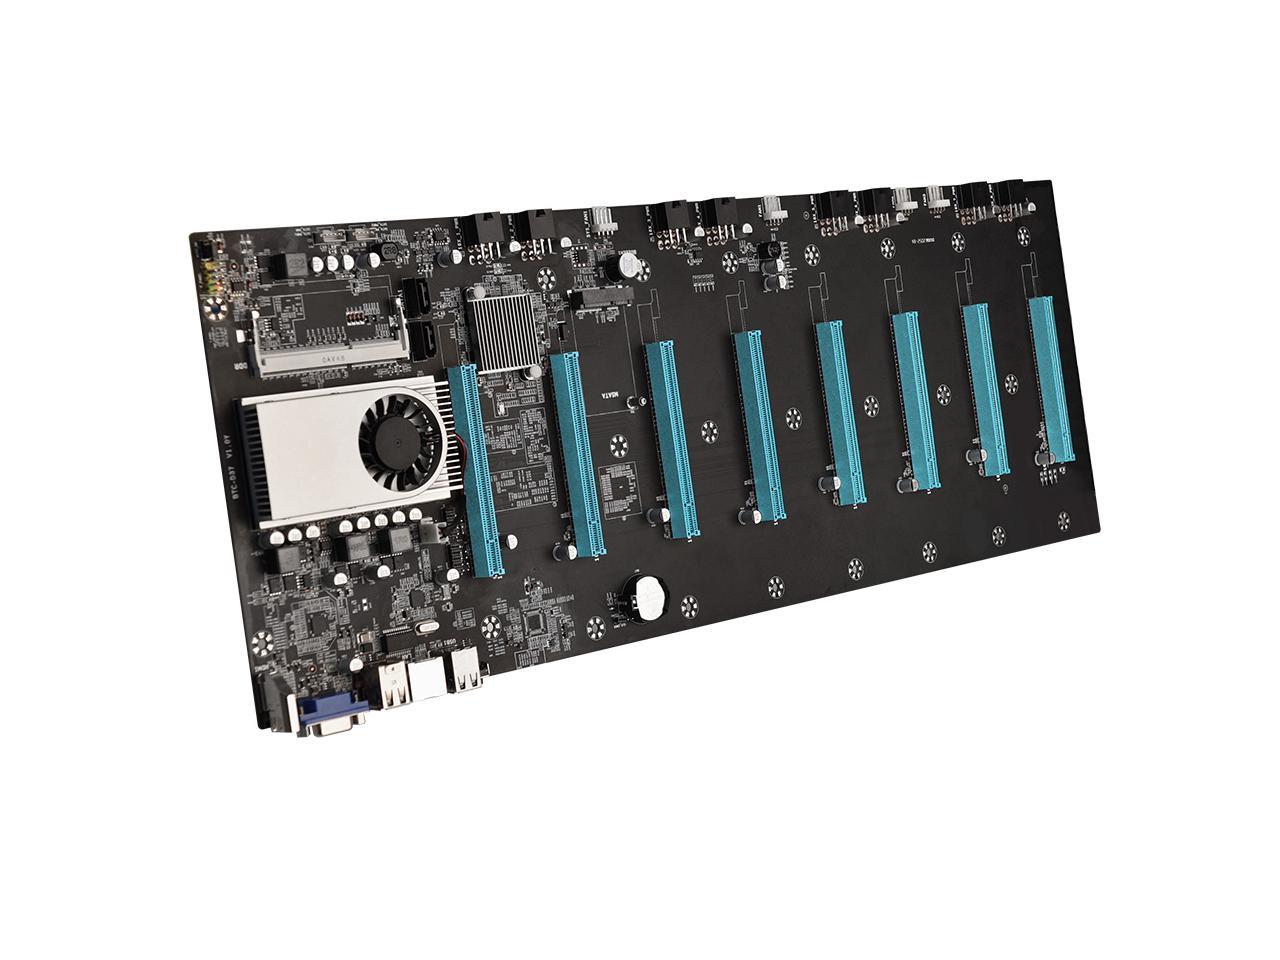 Btc-S37 Miner Motherboard Cpu Set 8 Video Card Slot Ddr3 Memory Integrated Vga Low Power Consumption Exquisite Better Than X99